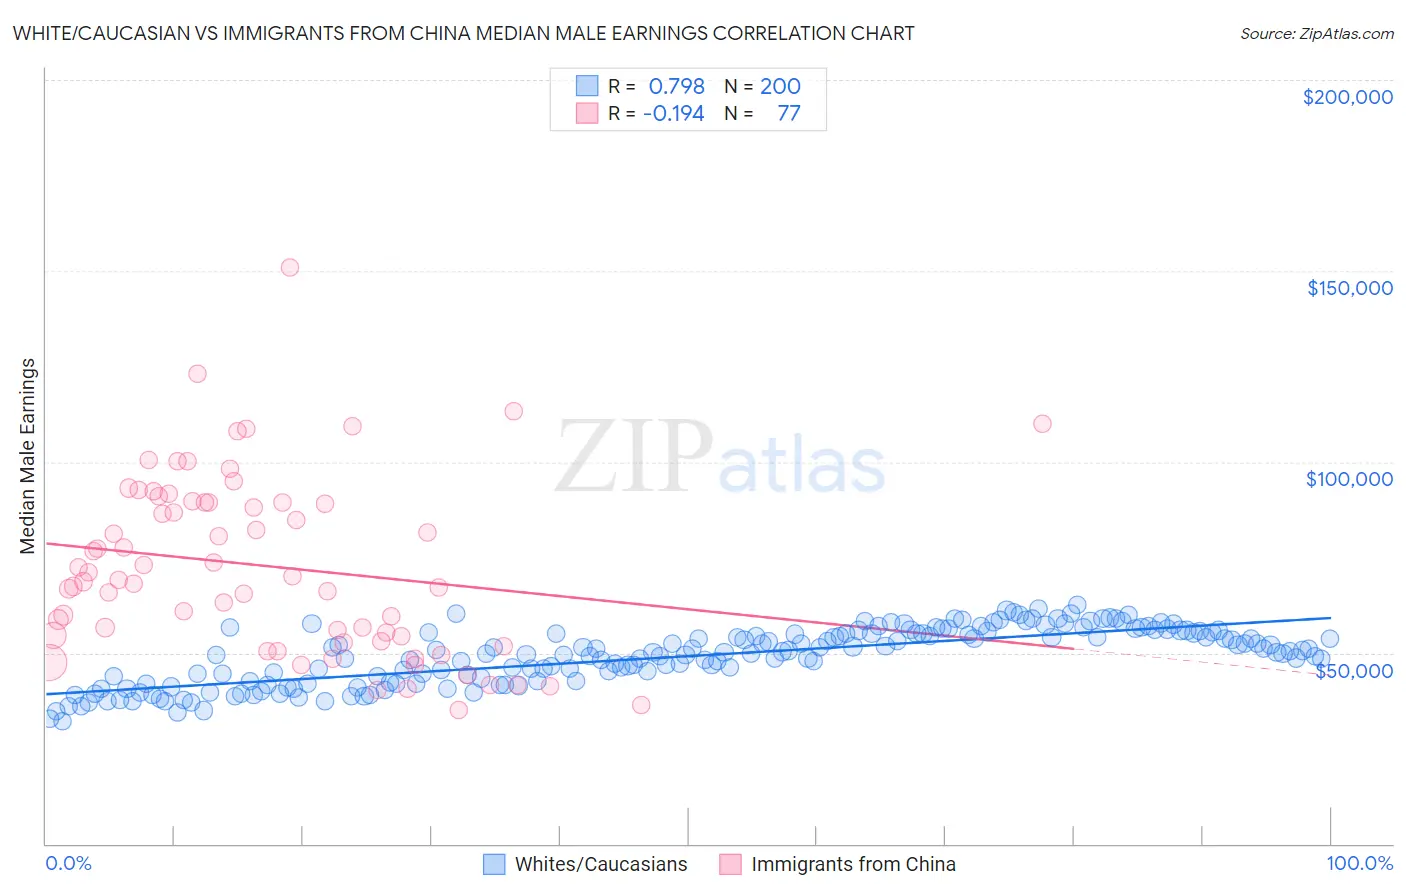 White/Caucasian vs Immigrants from China Median Male Earnings